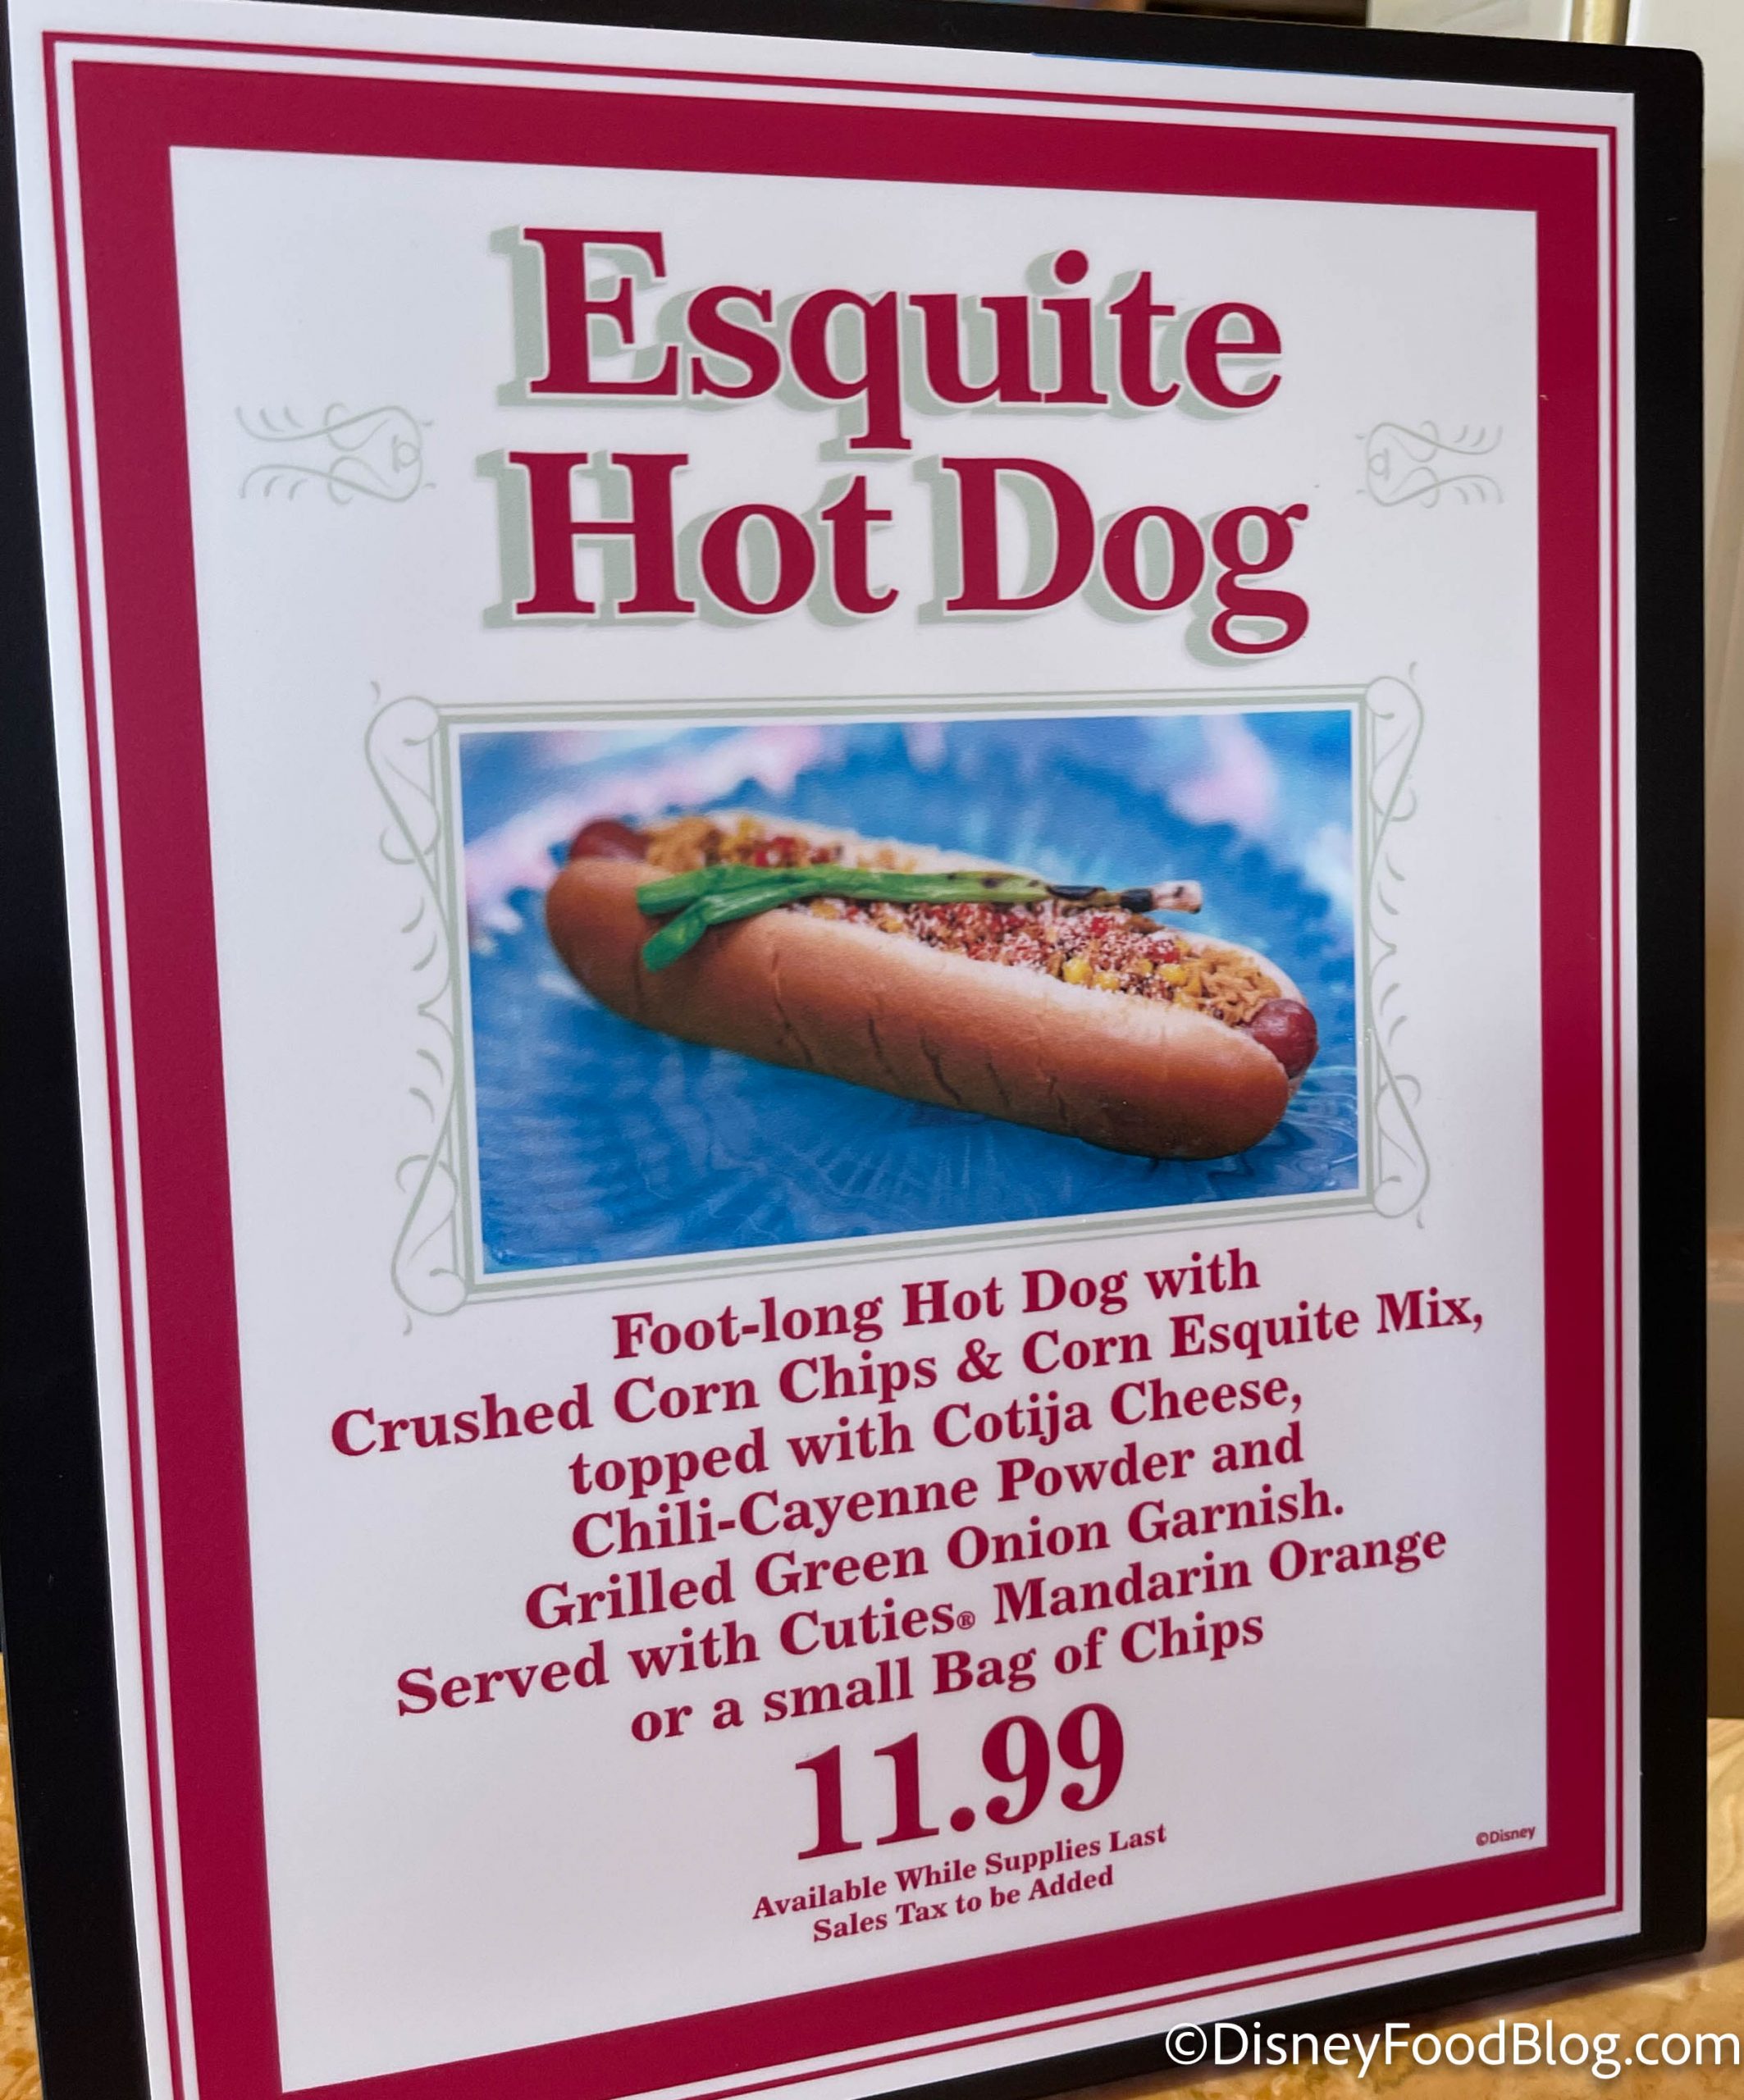 Review: WARNING! This Disneyland Hot Dog is SPICY